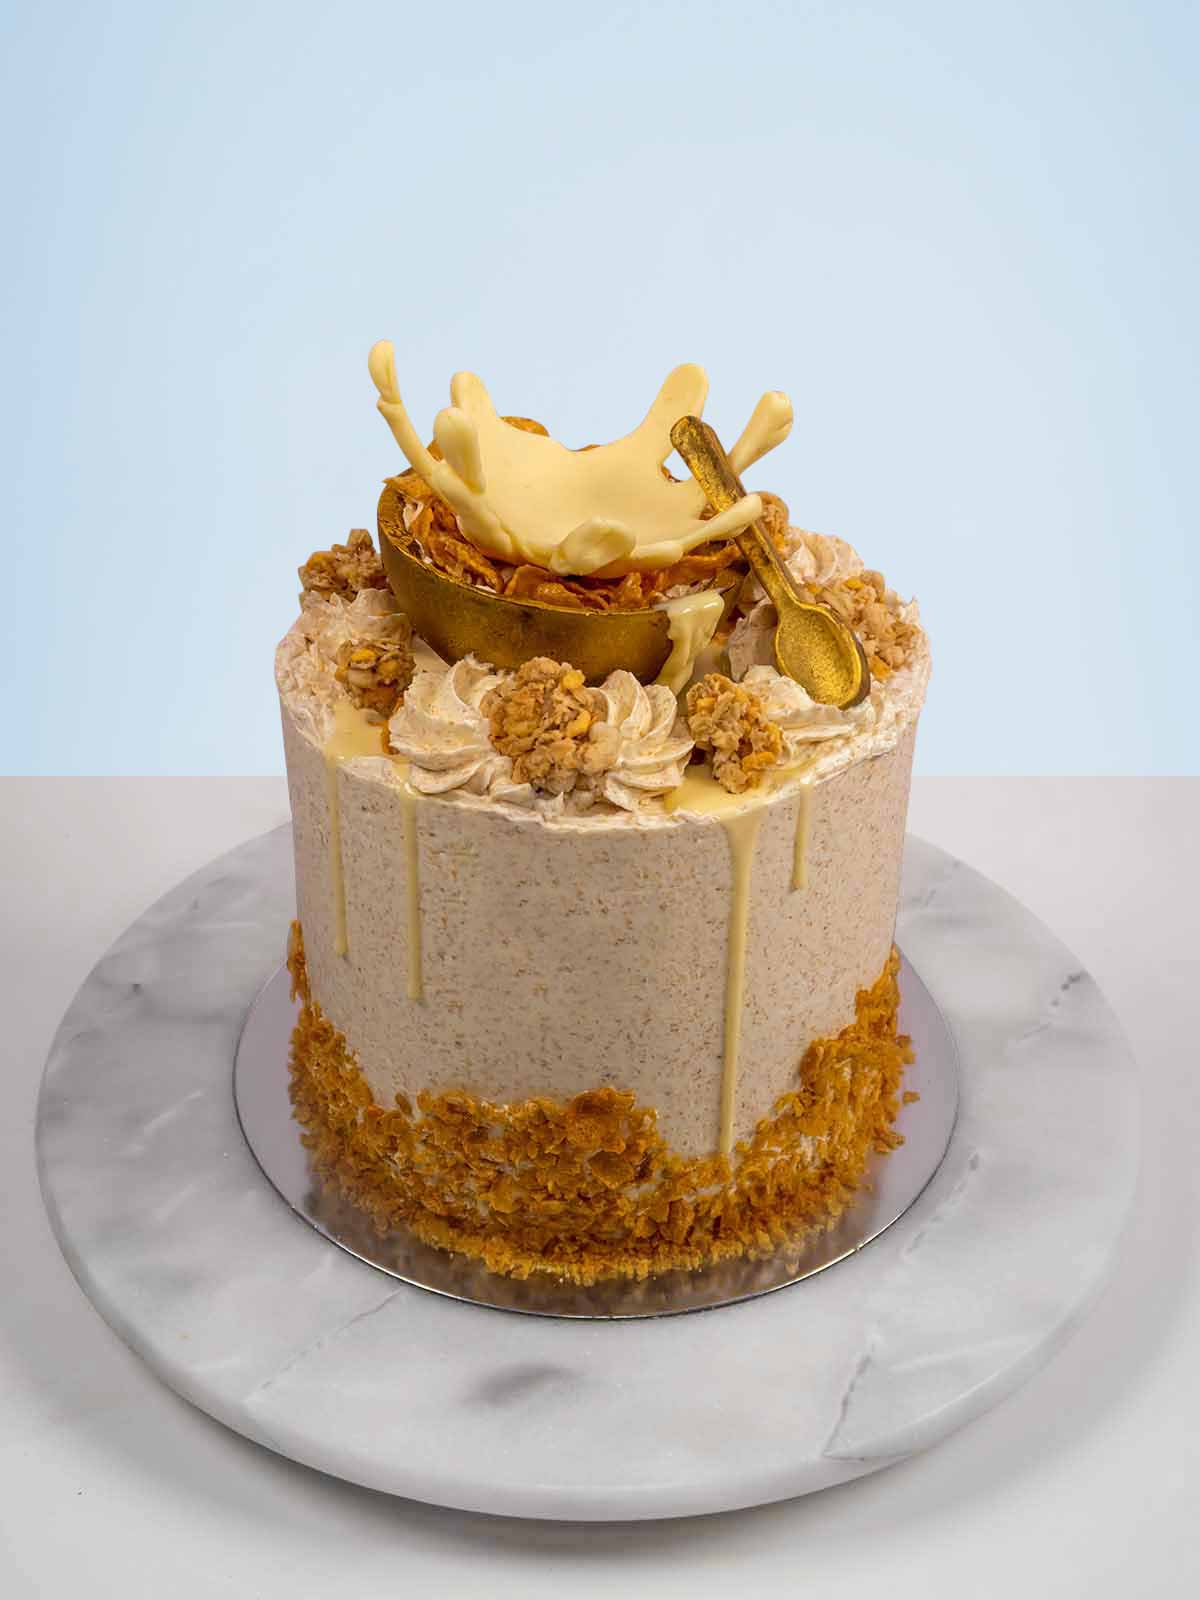 Crunchy Nut Cereal Cake to Buy